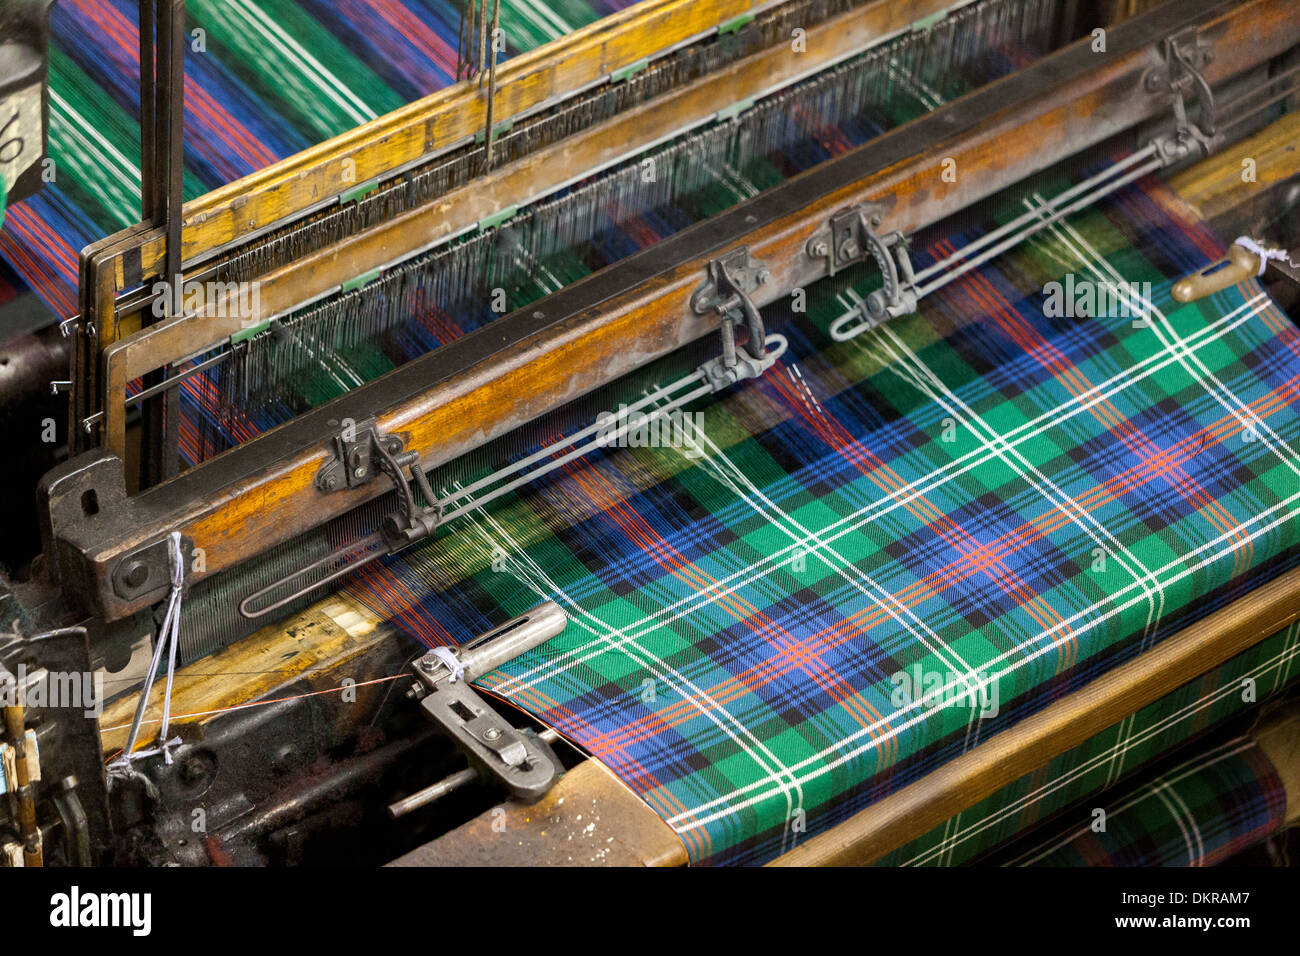 Rolls of Tartan Material being produced in fabric factory, for sale. Kilt Shop Royal Mile Edinburgh Scotland UK. Stock Photo